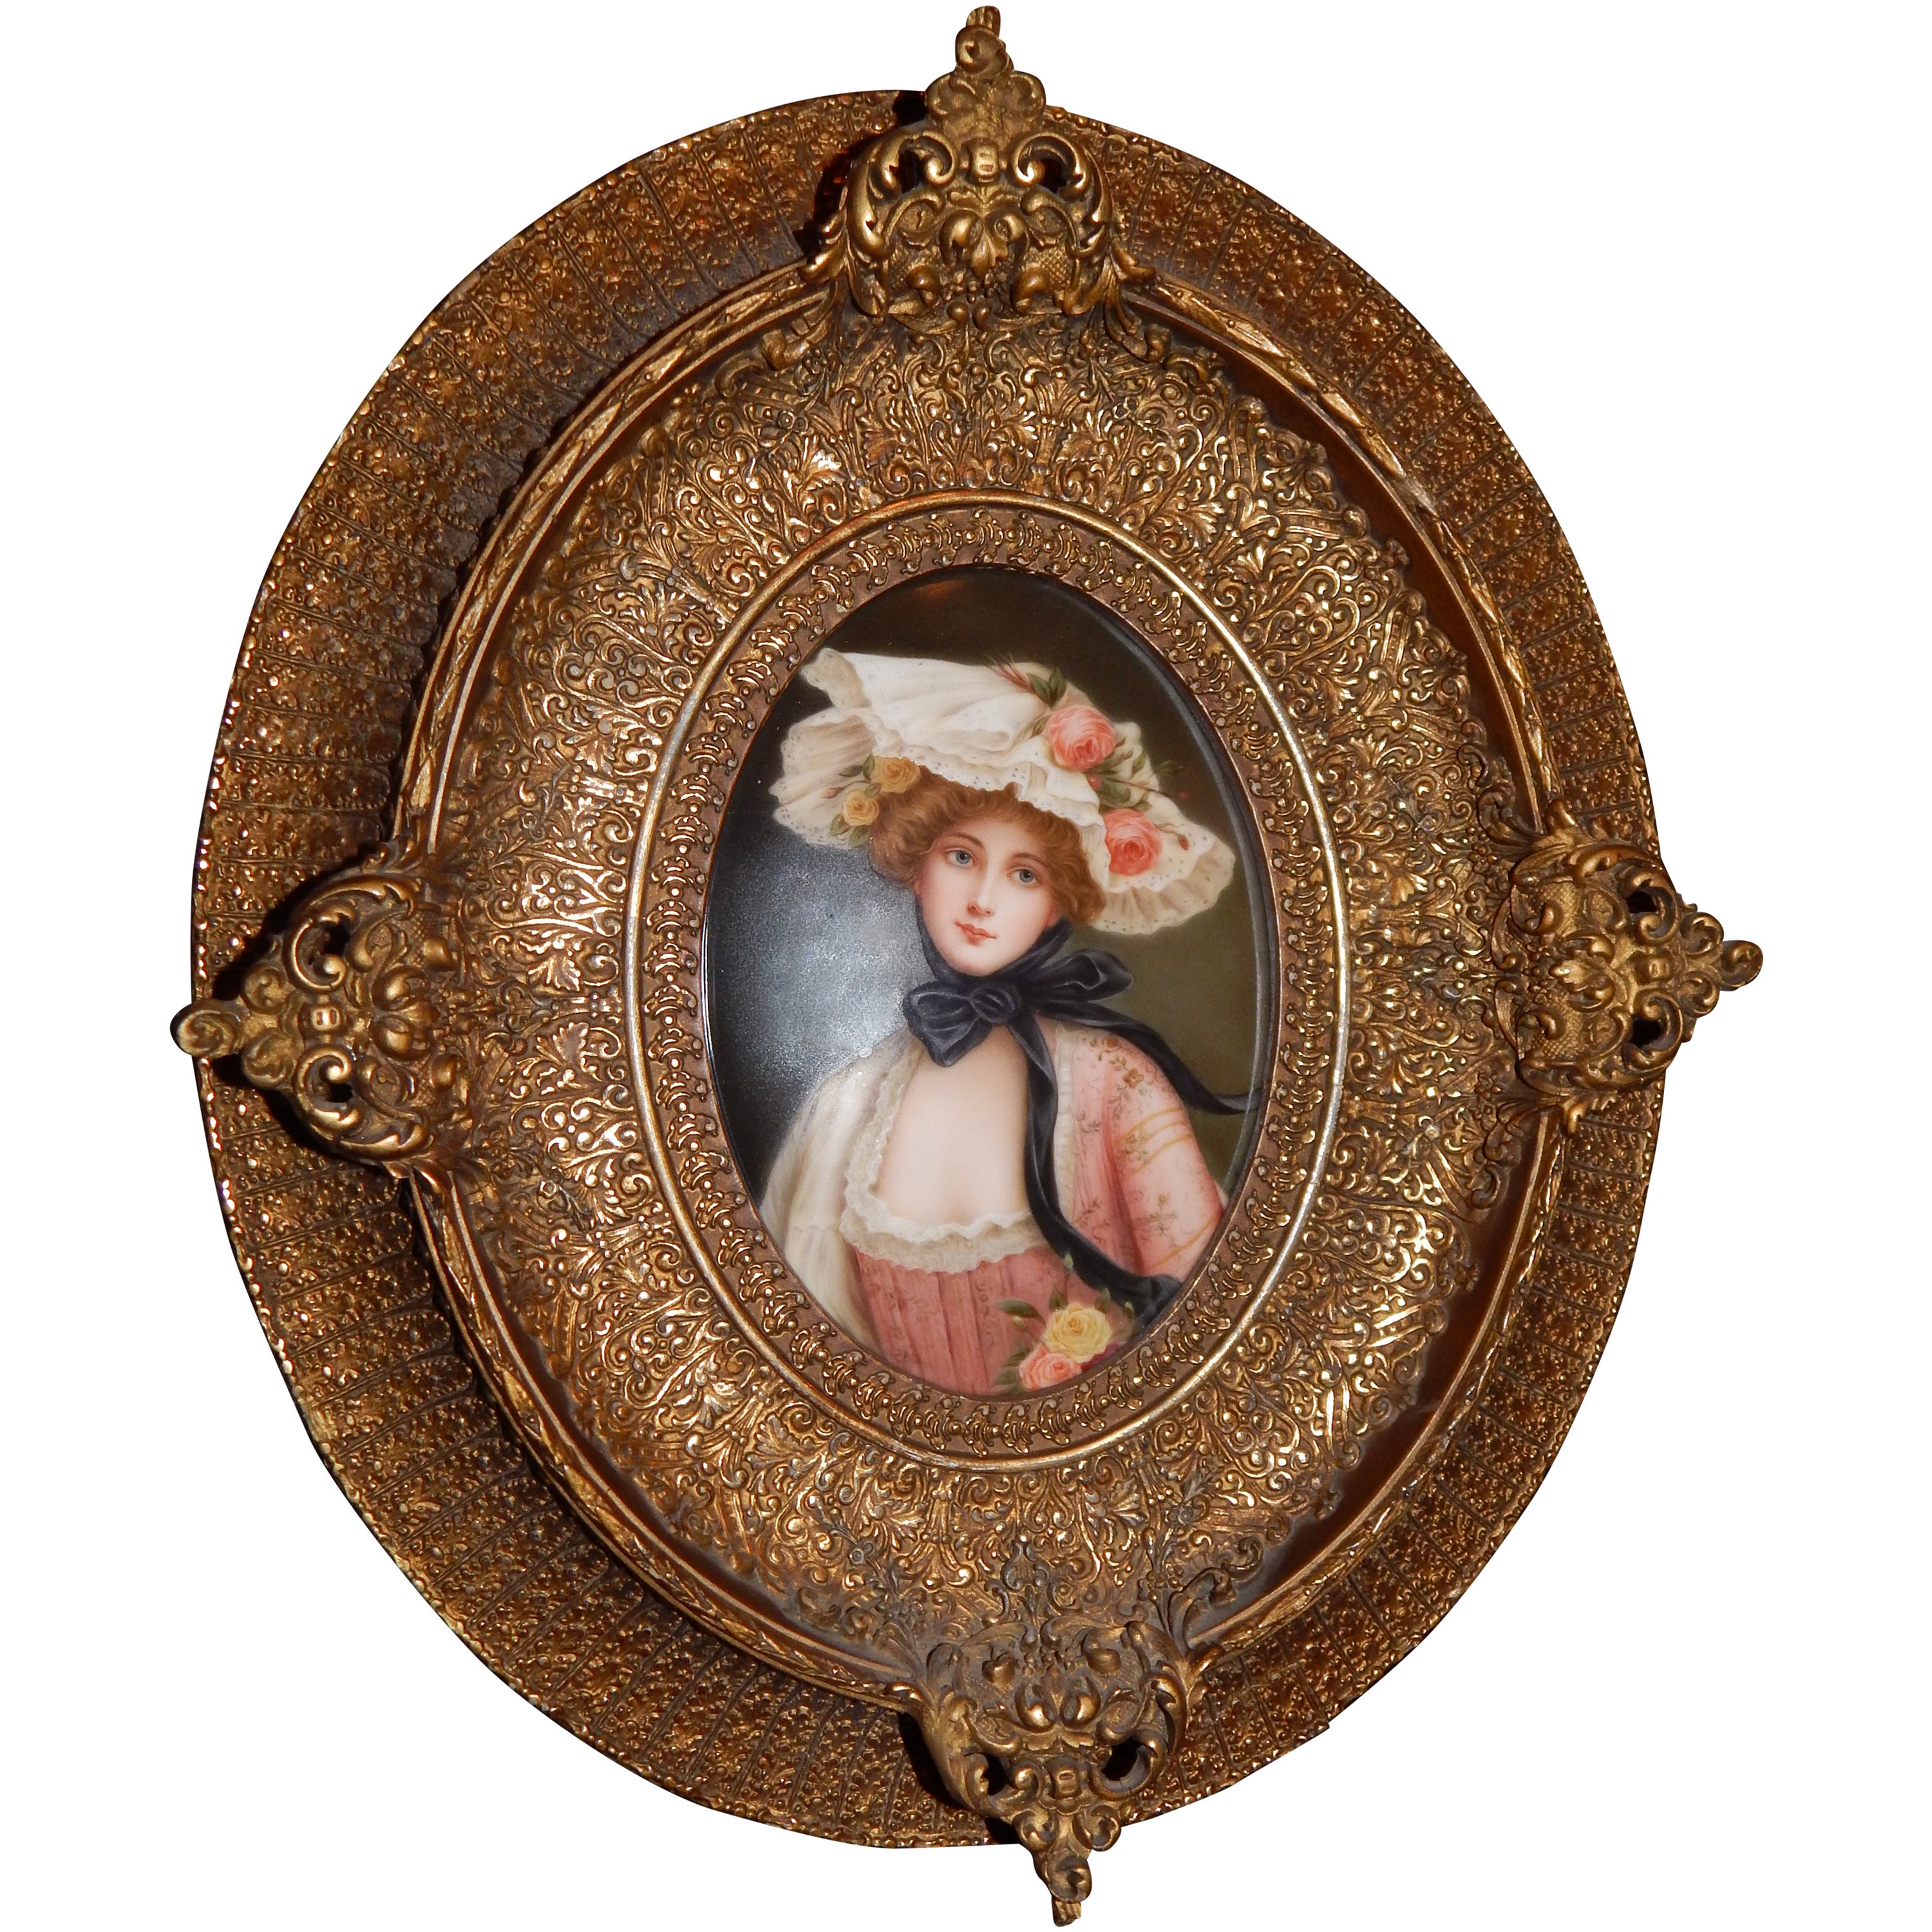 KPM Style Porcelain Plaque by Wagner